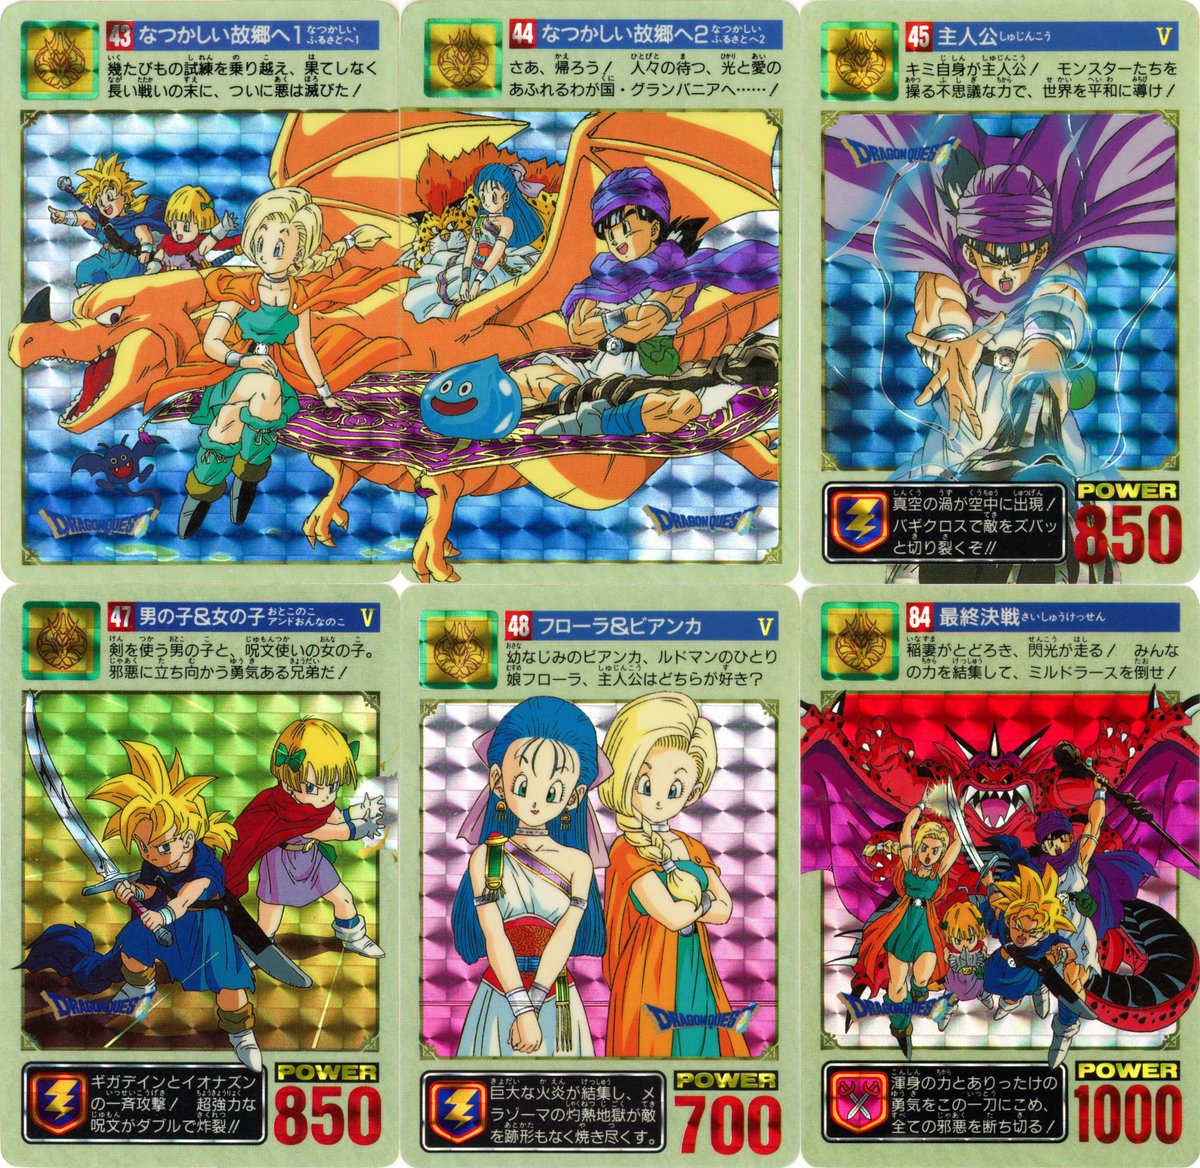 All 6 shiny cards from set 2 of the #DragonQuest V Carddass card set. In this set, cards 1, 2, 3, 5, 6, and 42 are shiny (the numbering continues from set 1) #DQ